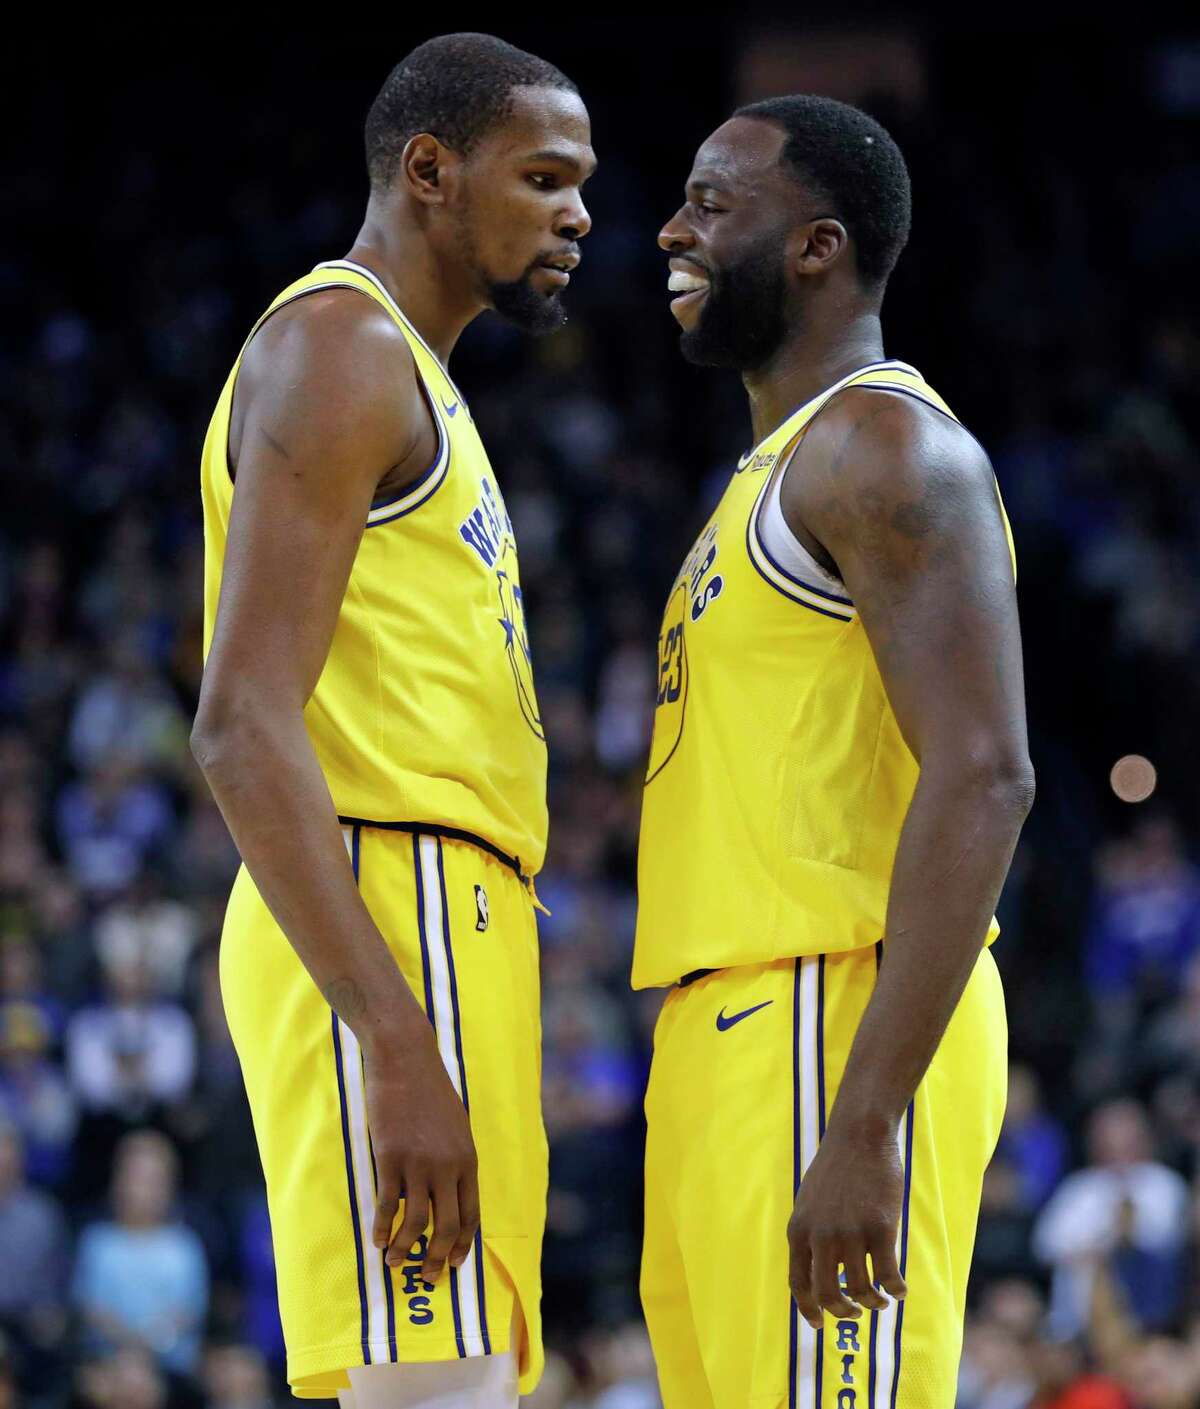 Golden State Warriors' Kevin Durant reacts to a Draymond Green technical foul in 4th quarter of Warriors' 125-123 win over Sacramento Kings in NBA game at Oracle Arena in Oakland, Calif., on Thursday, February 21, 2019.